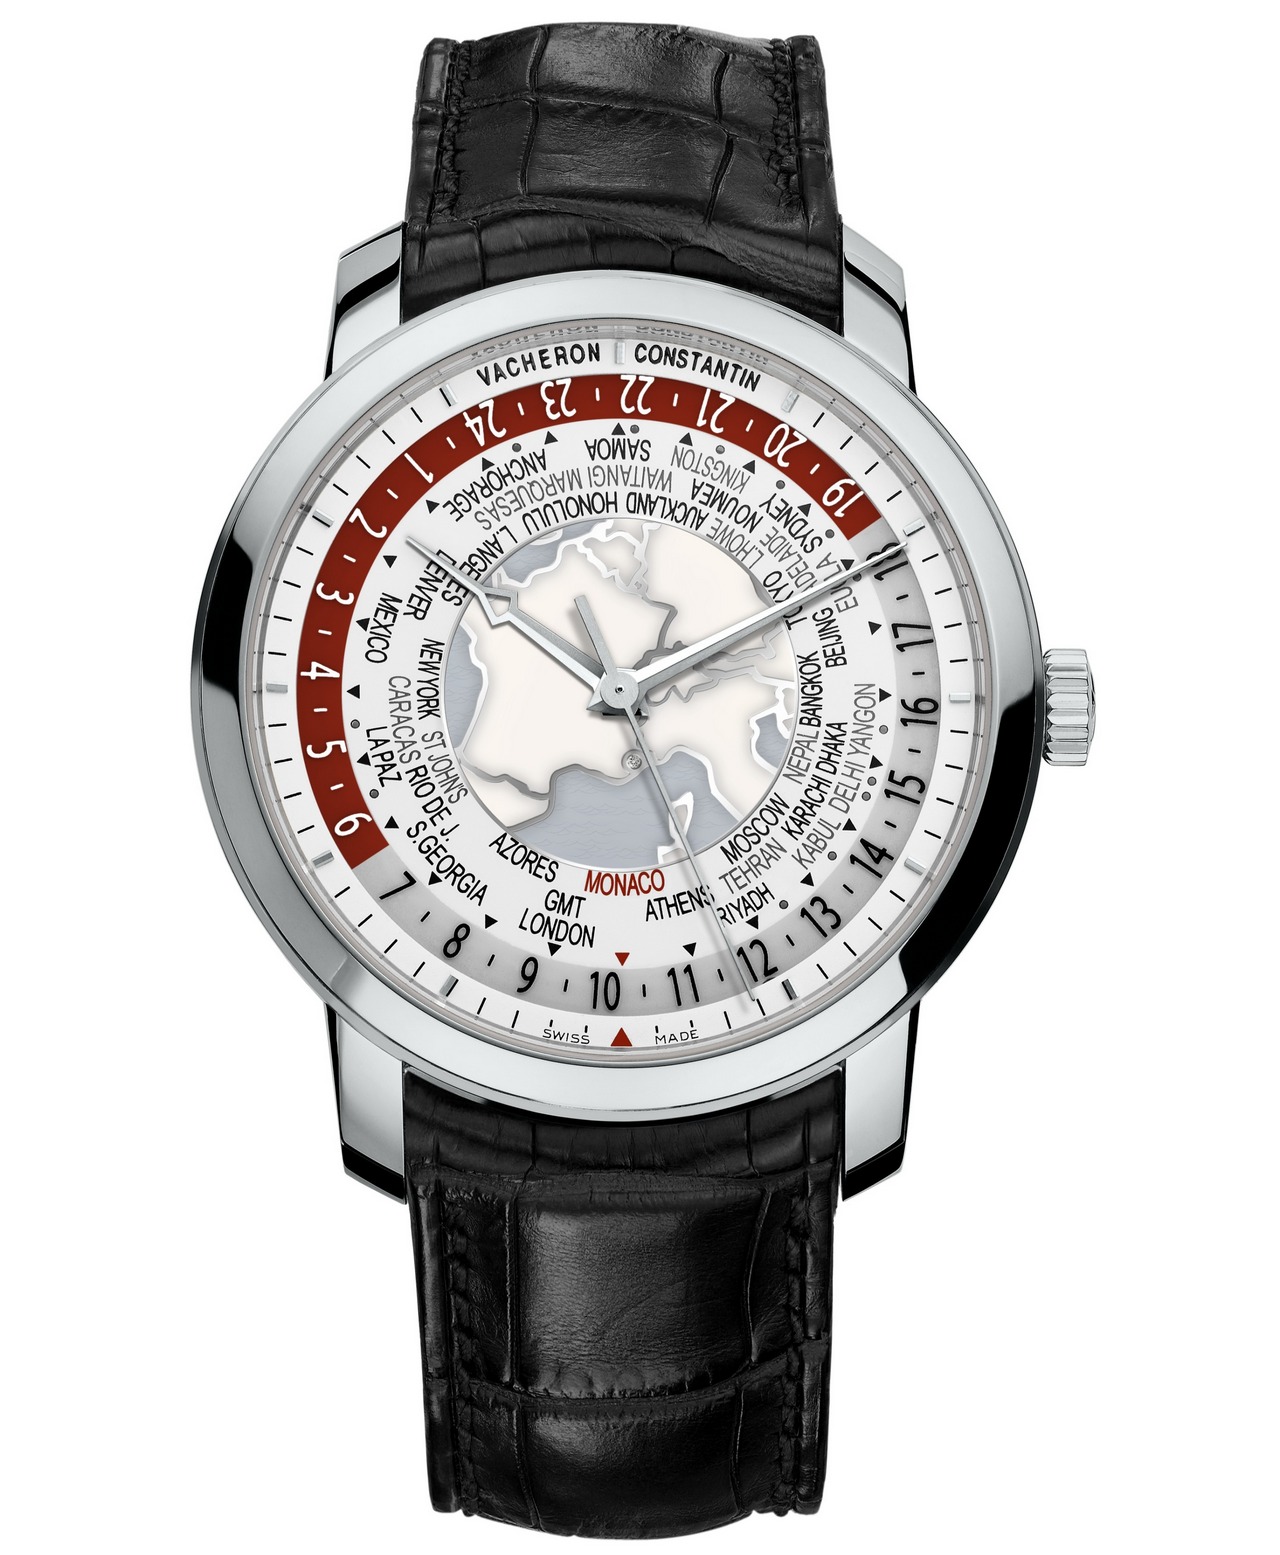 anteprima-only-watch-2013-vacheron-constantin-patrimony-traditionnelle-world-time_0-100_8